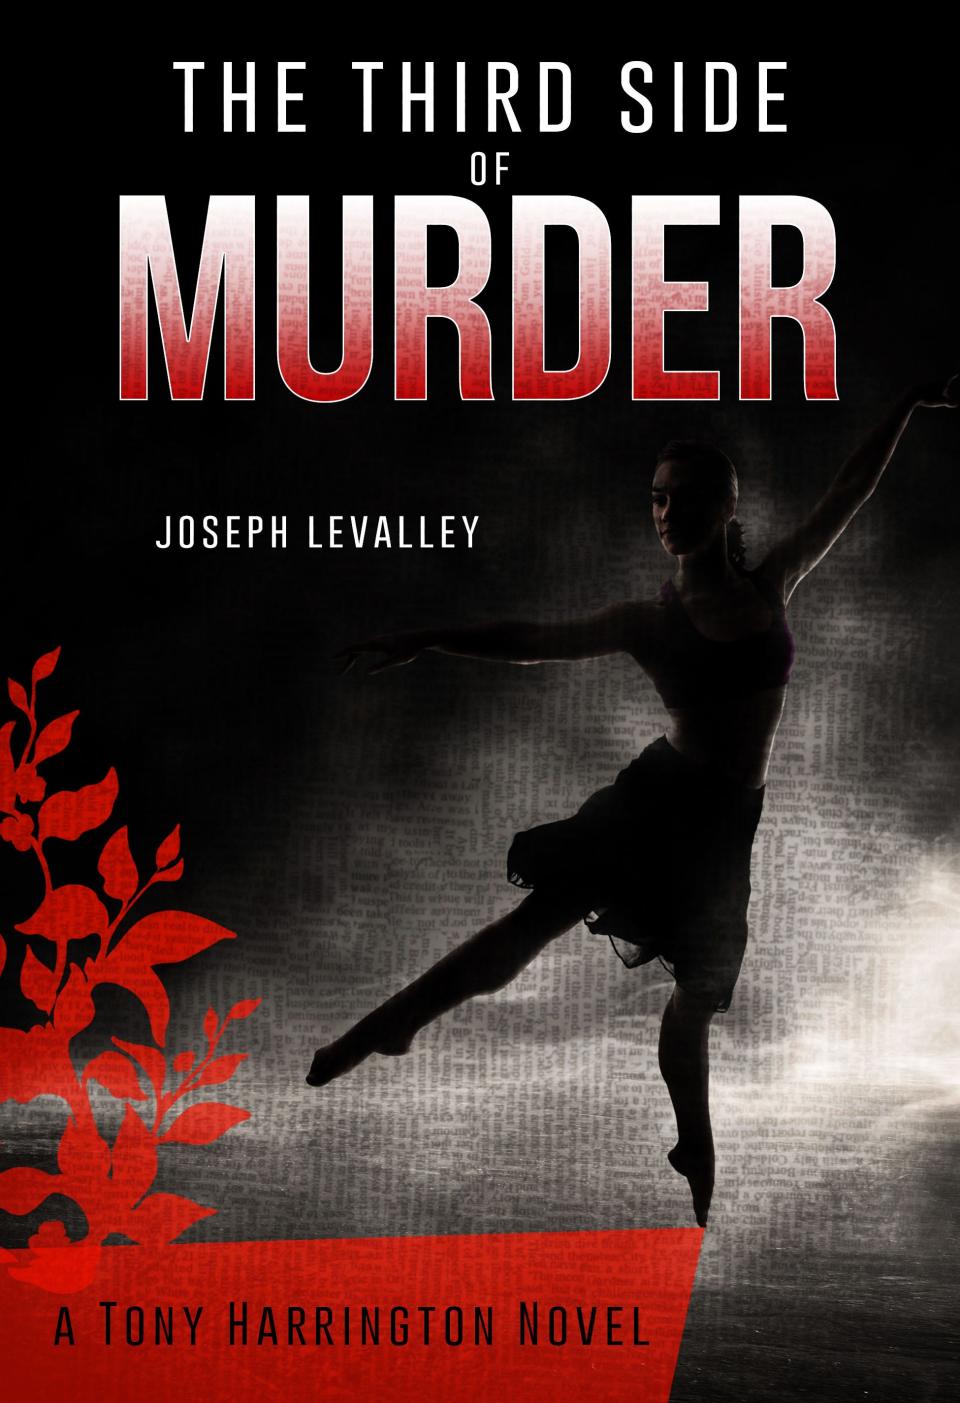 The Third Side of Murder (2021), by Joe LeValley.